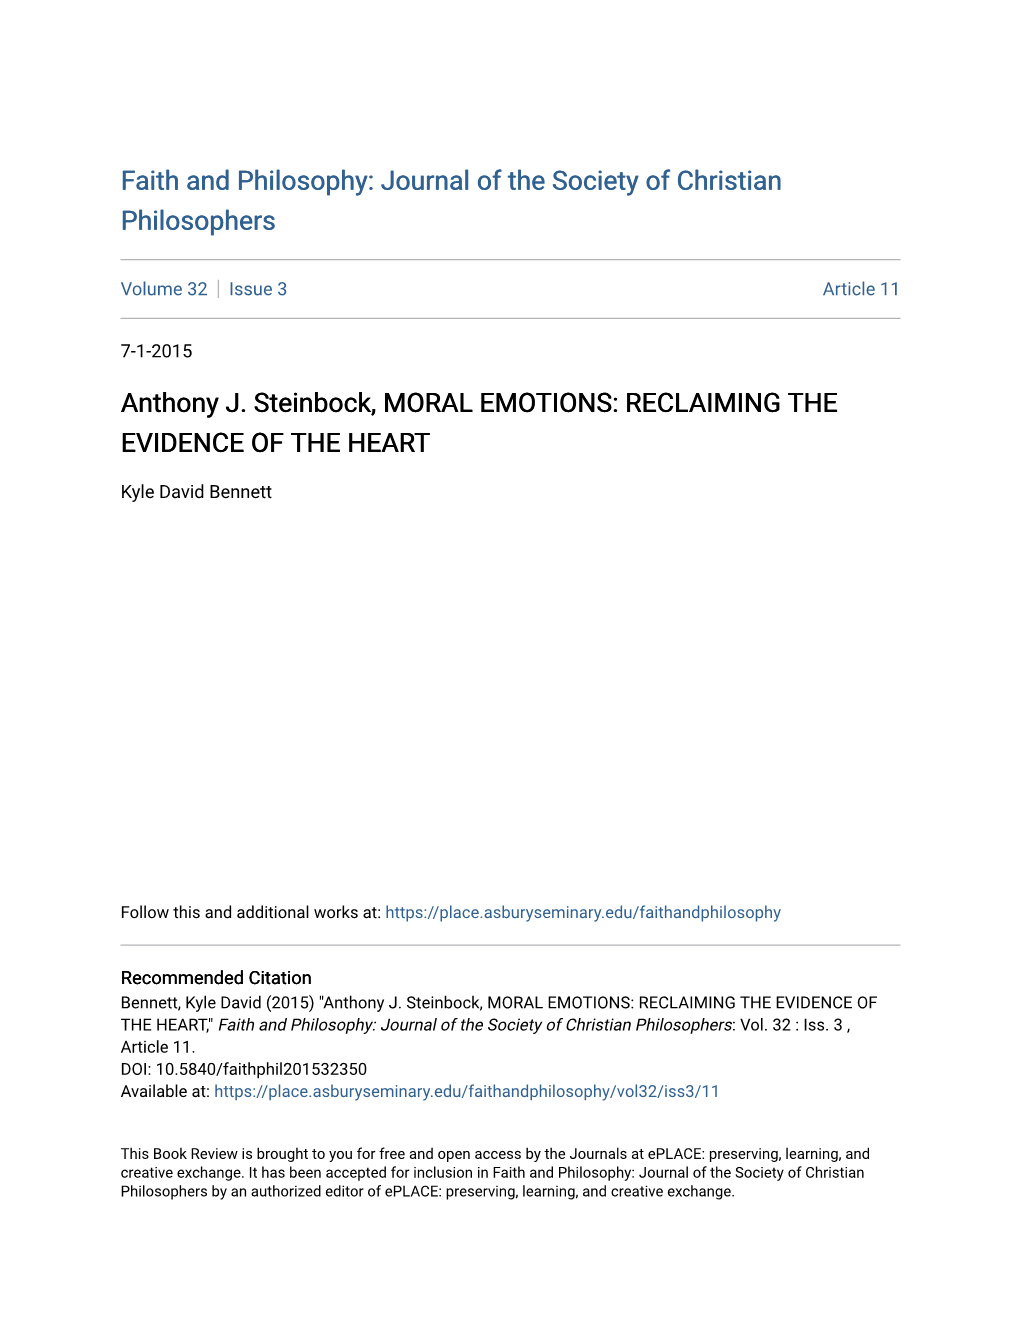 Anthony J. Steinbock, MORAL EMOTIONS: RECLAIMING the EVIDENCE of the HEART